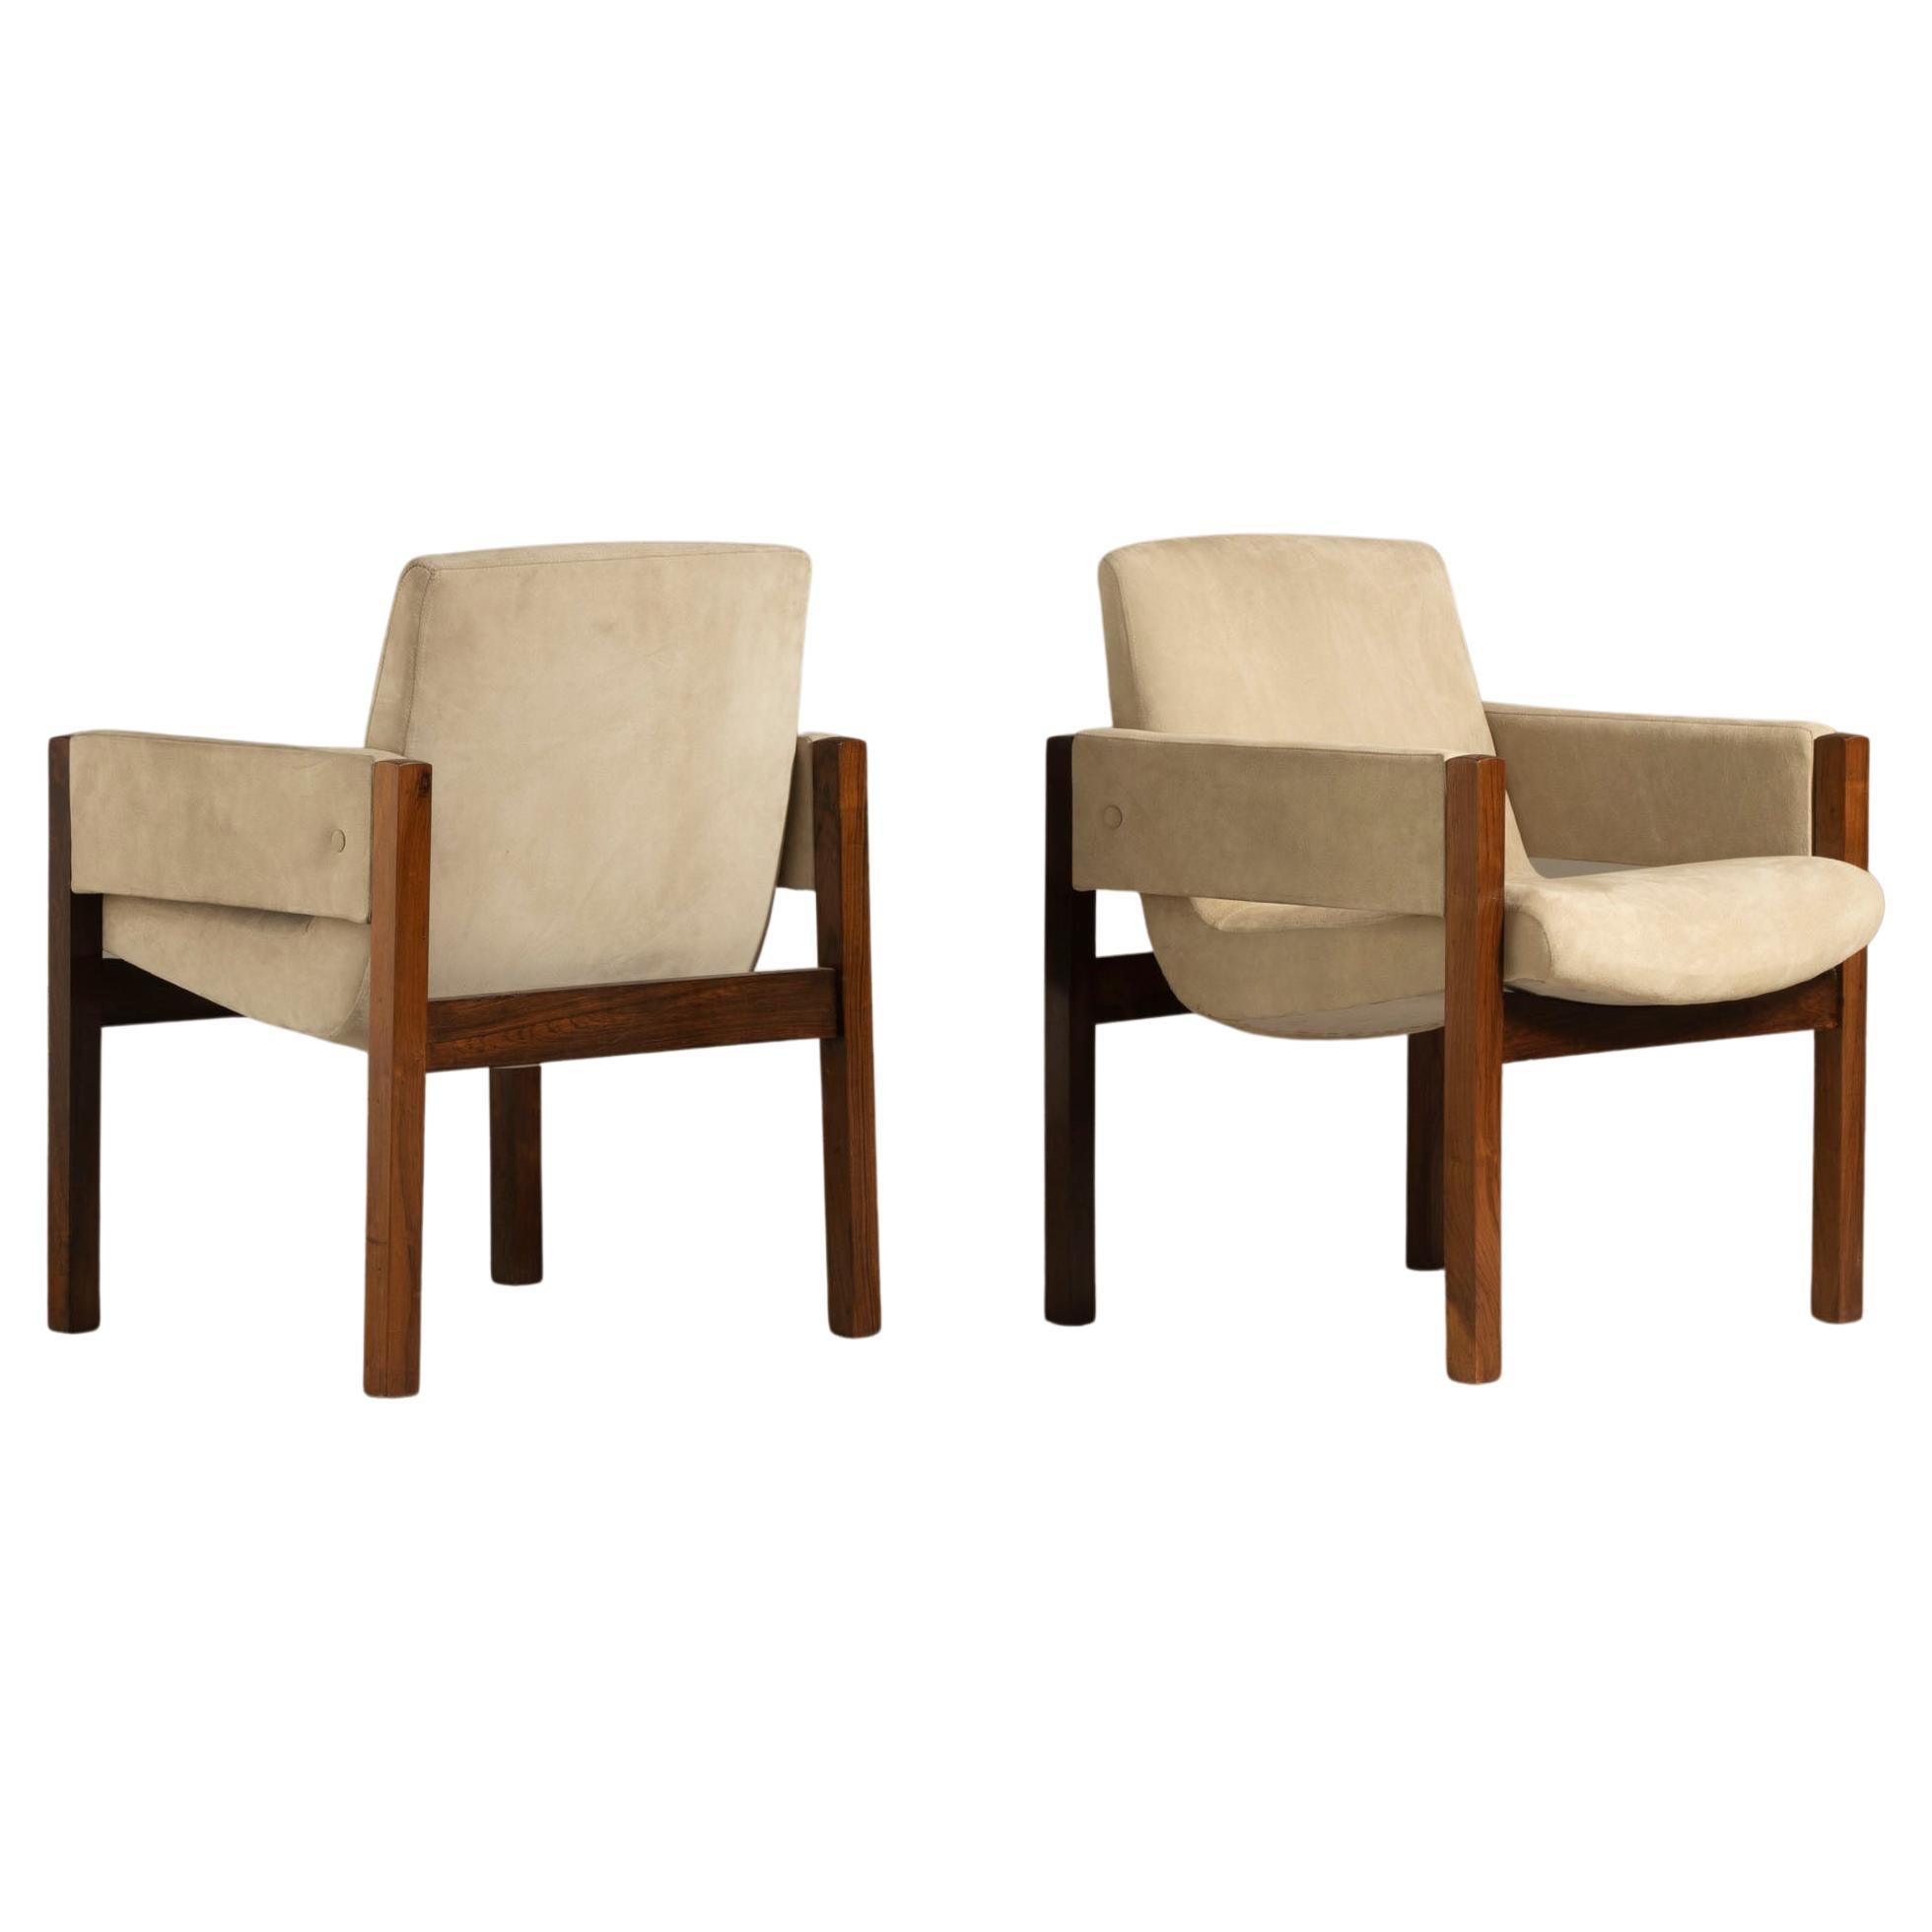 Pair of "Arco" Armchairs, by Sérgio Rodrigues, 1960, Brazilian Hardwood